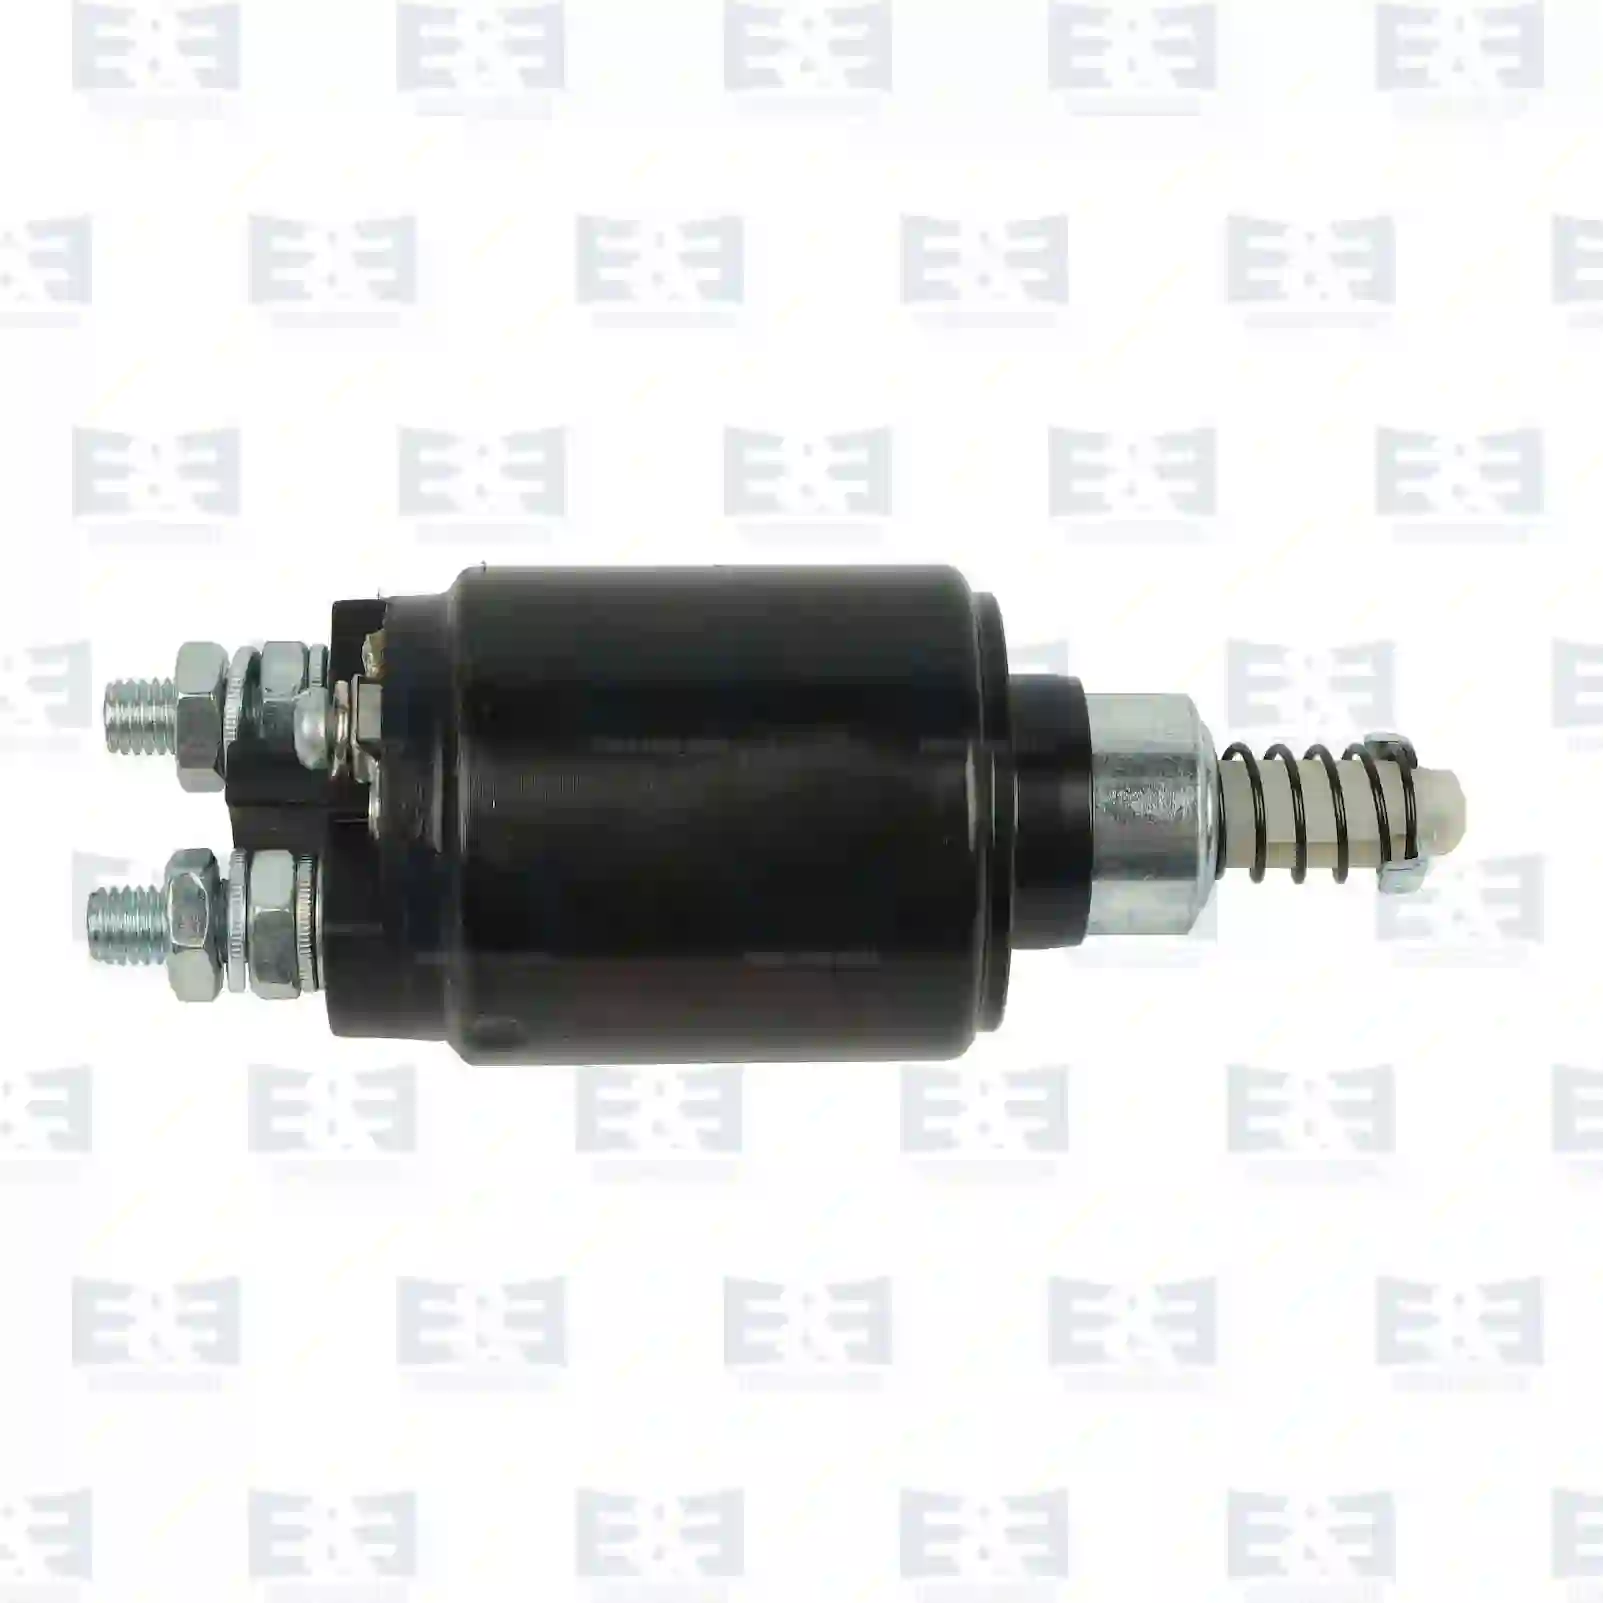 Starter Motor Solenoid switch, EE No 2E2299760 ,  oem no:D441189, 111550, 09959806, 09984108, 79033664, D441189, 02985006, 93157969, 93159769, 02985006, A5000241471, 0001529310, 23343-9X800, 5000559075, 5000822134, 296191202, 263367, 386768, 6463967 E&E Truck Spare Parts | Truck Spare Parts, Auotomotive Spare Parts